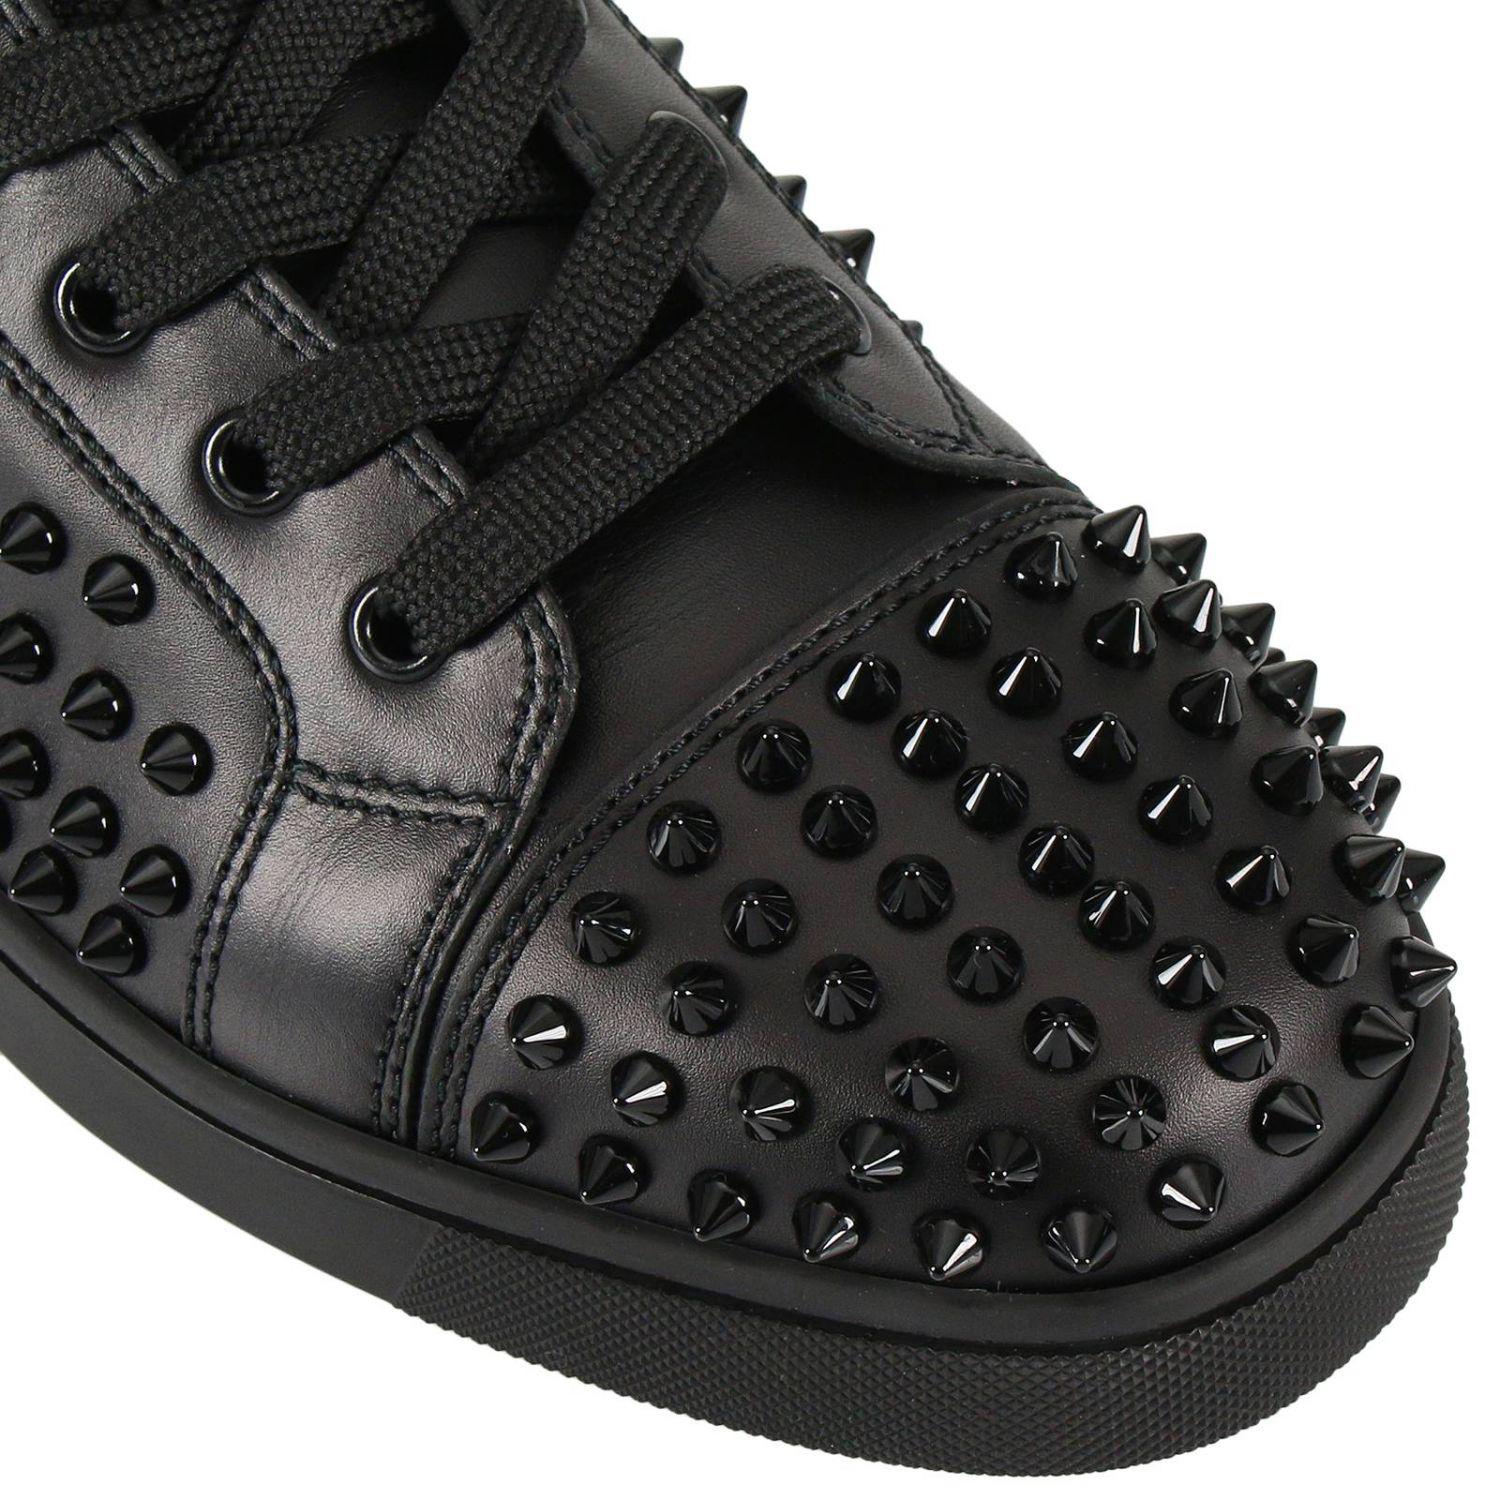 Christian Louboutin Leather Studded Louis High-top Sneakers in Black ...